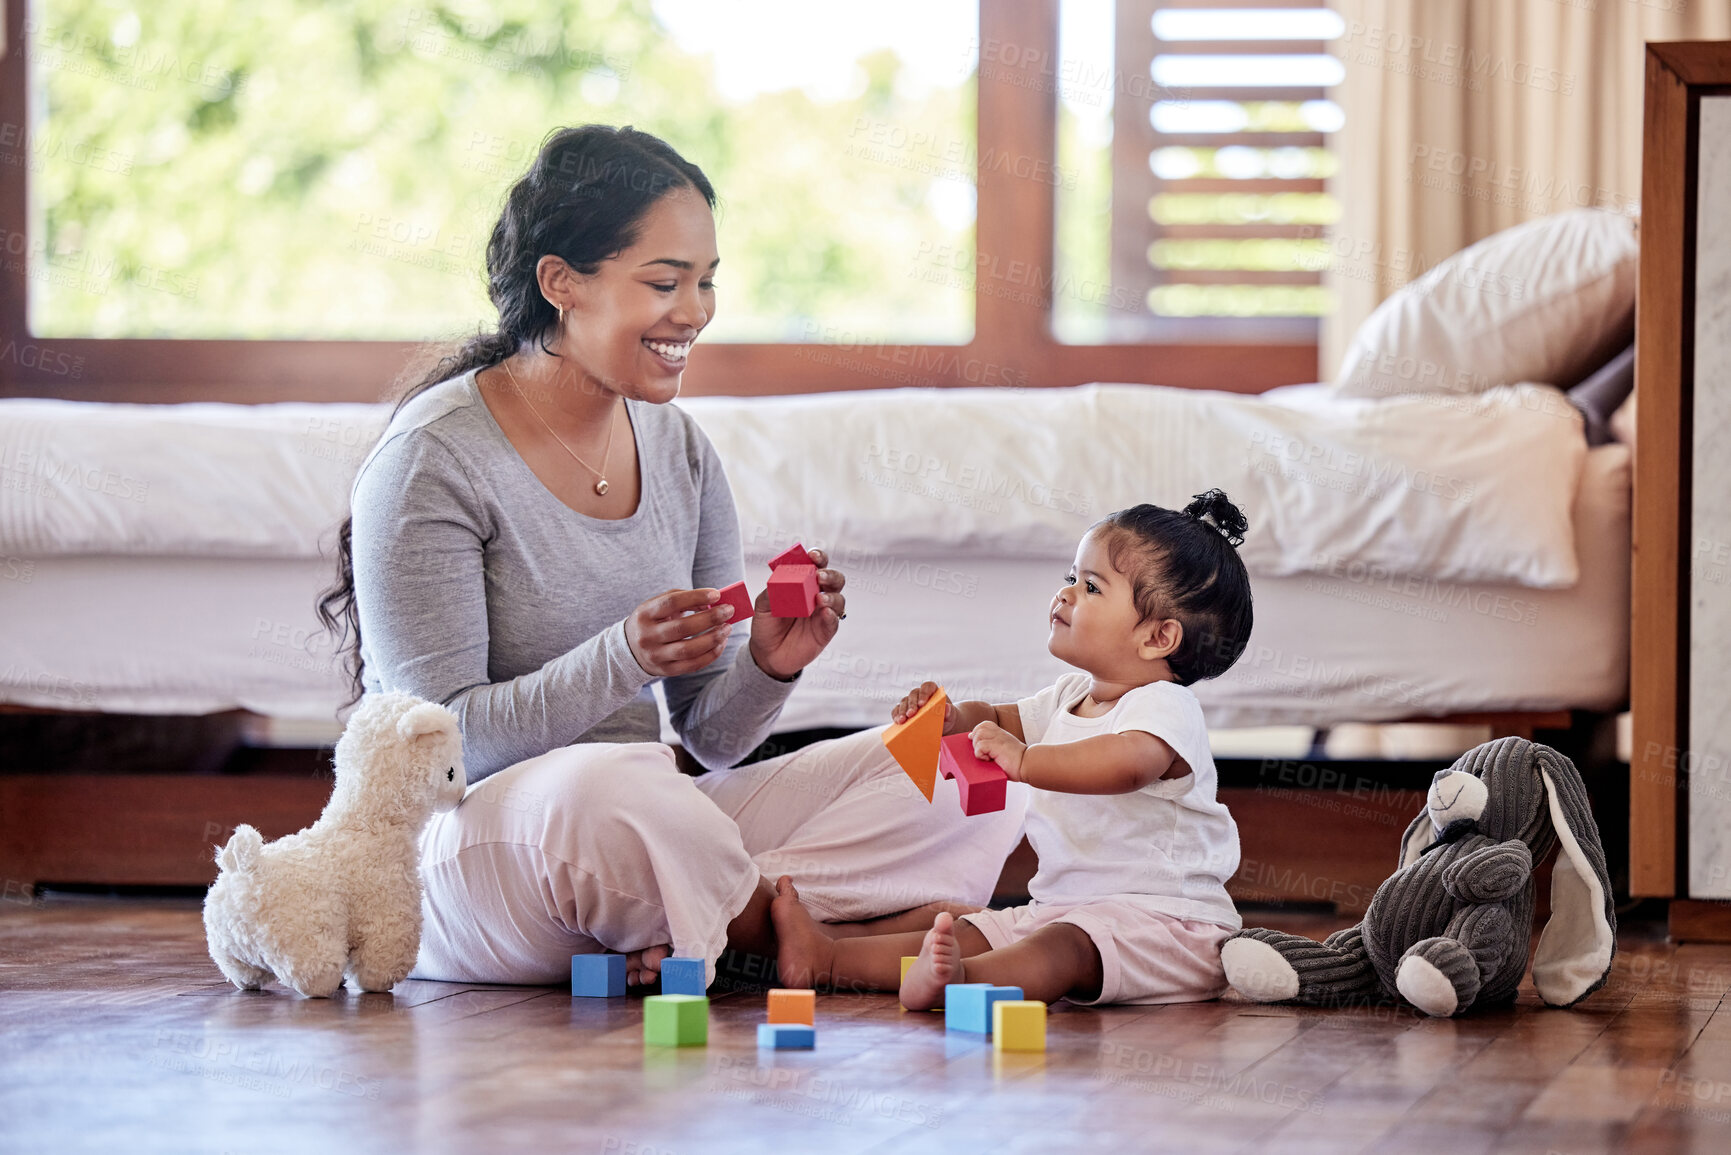 Buy stock photo Beautiful young woman and single mother playing toy blocks with her adorable little baby daughter in the bedroom at home. Happy mixed race woman bonding with her little girl. Education starts at home